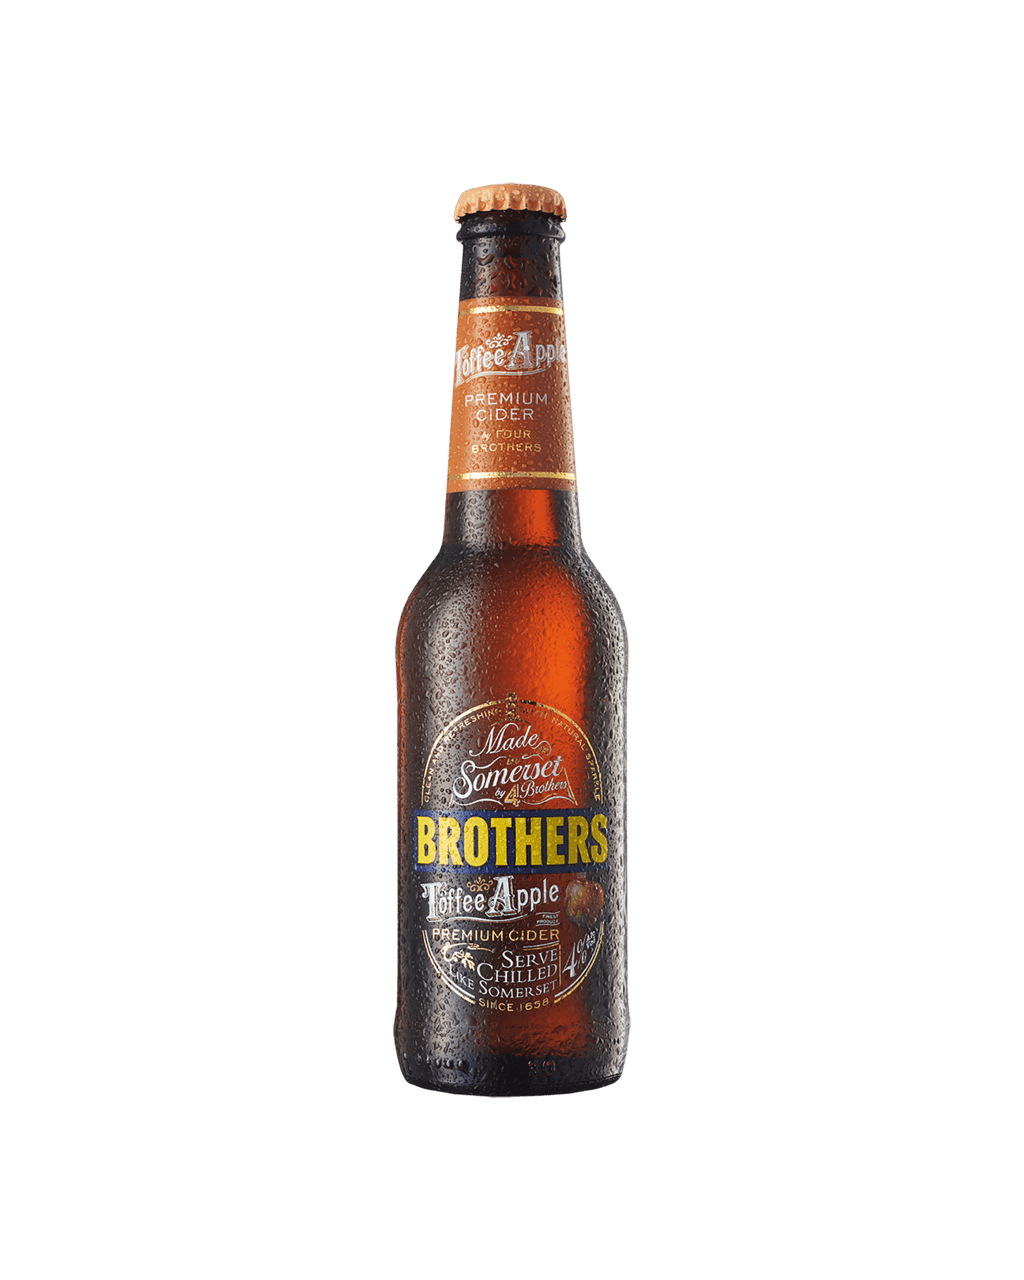 how many calories in brothers toffee apple cider